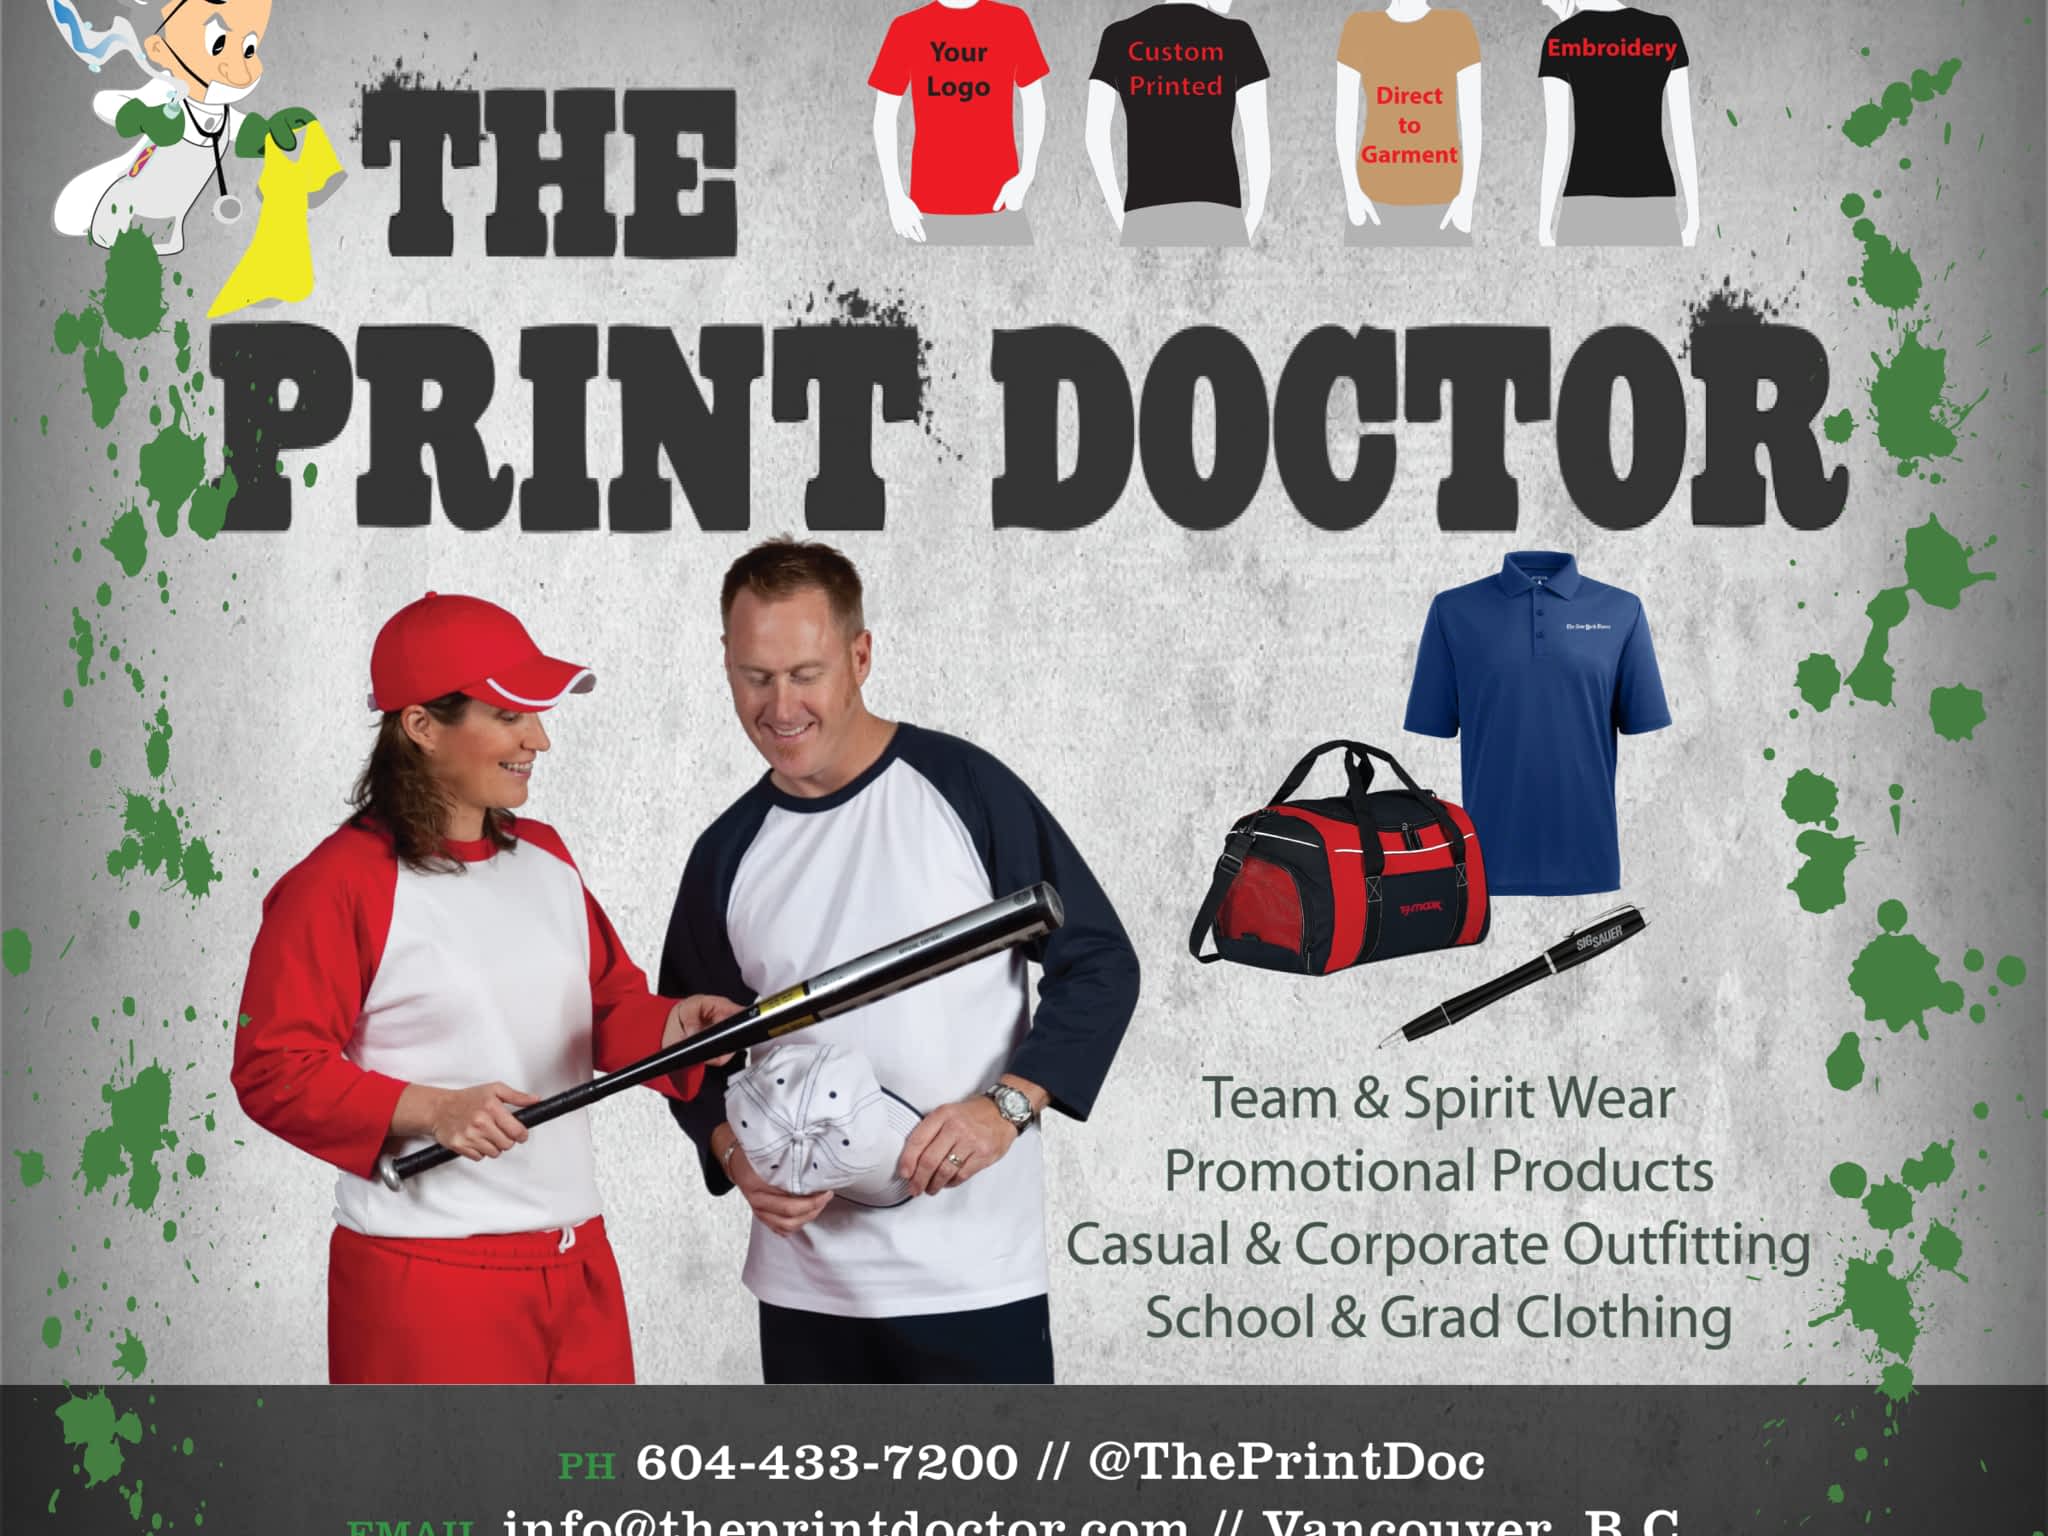 photo The Print Doctor